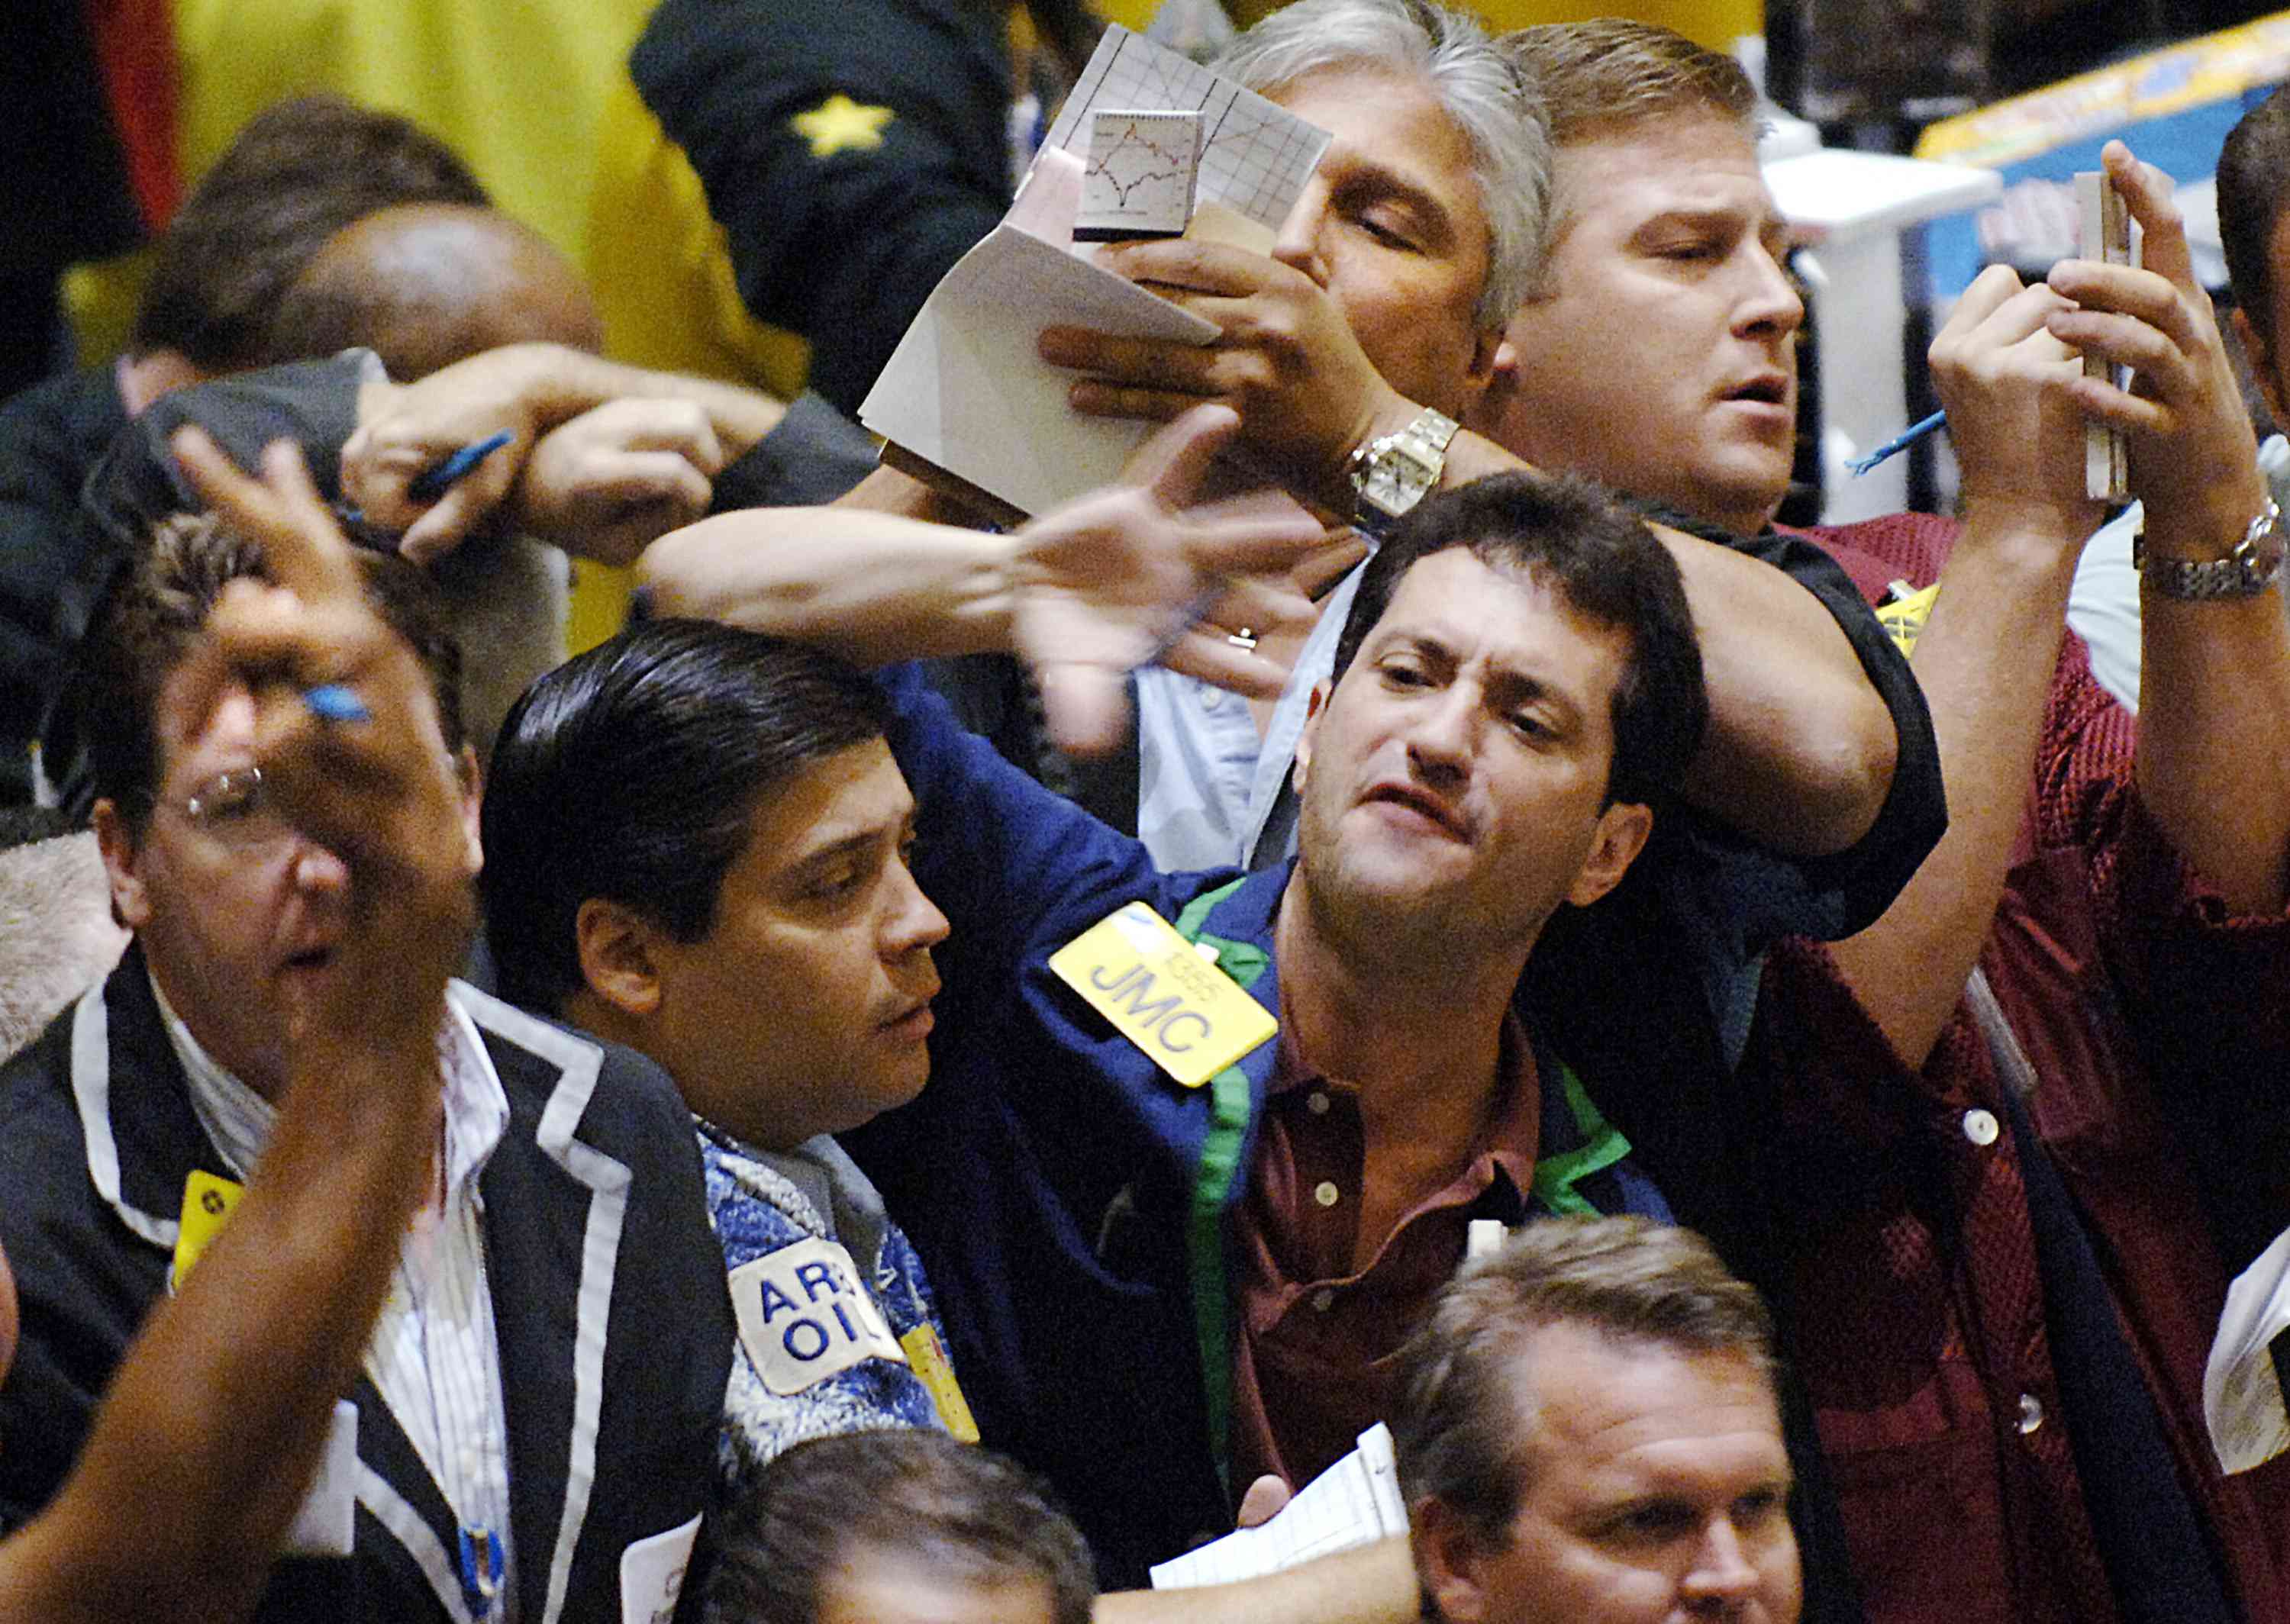 Traders on the floor of an exchange.